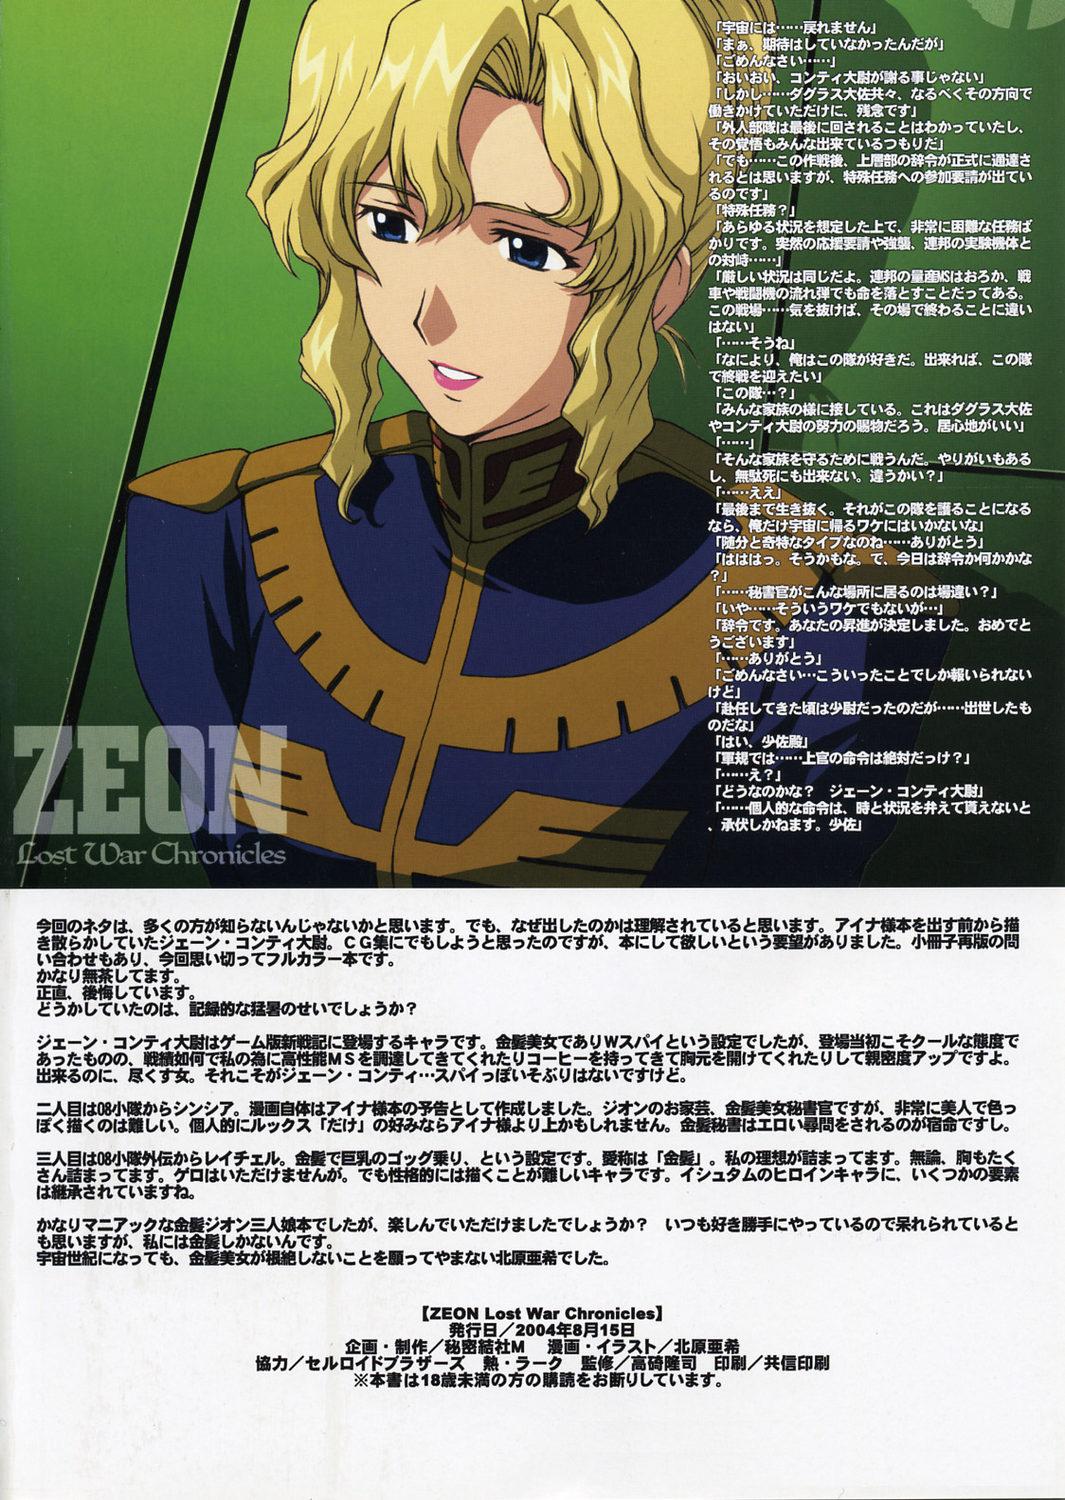 Siririca ZEON Lost War Chronicles - Mobile suit gundam lost war chronicles Bubblebutt - Page 33